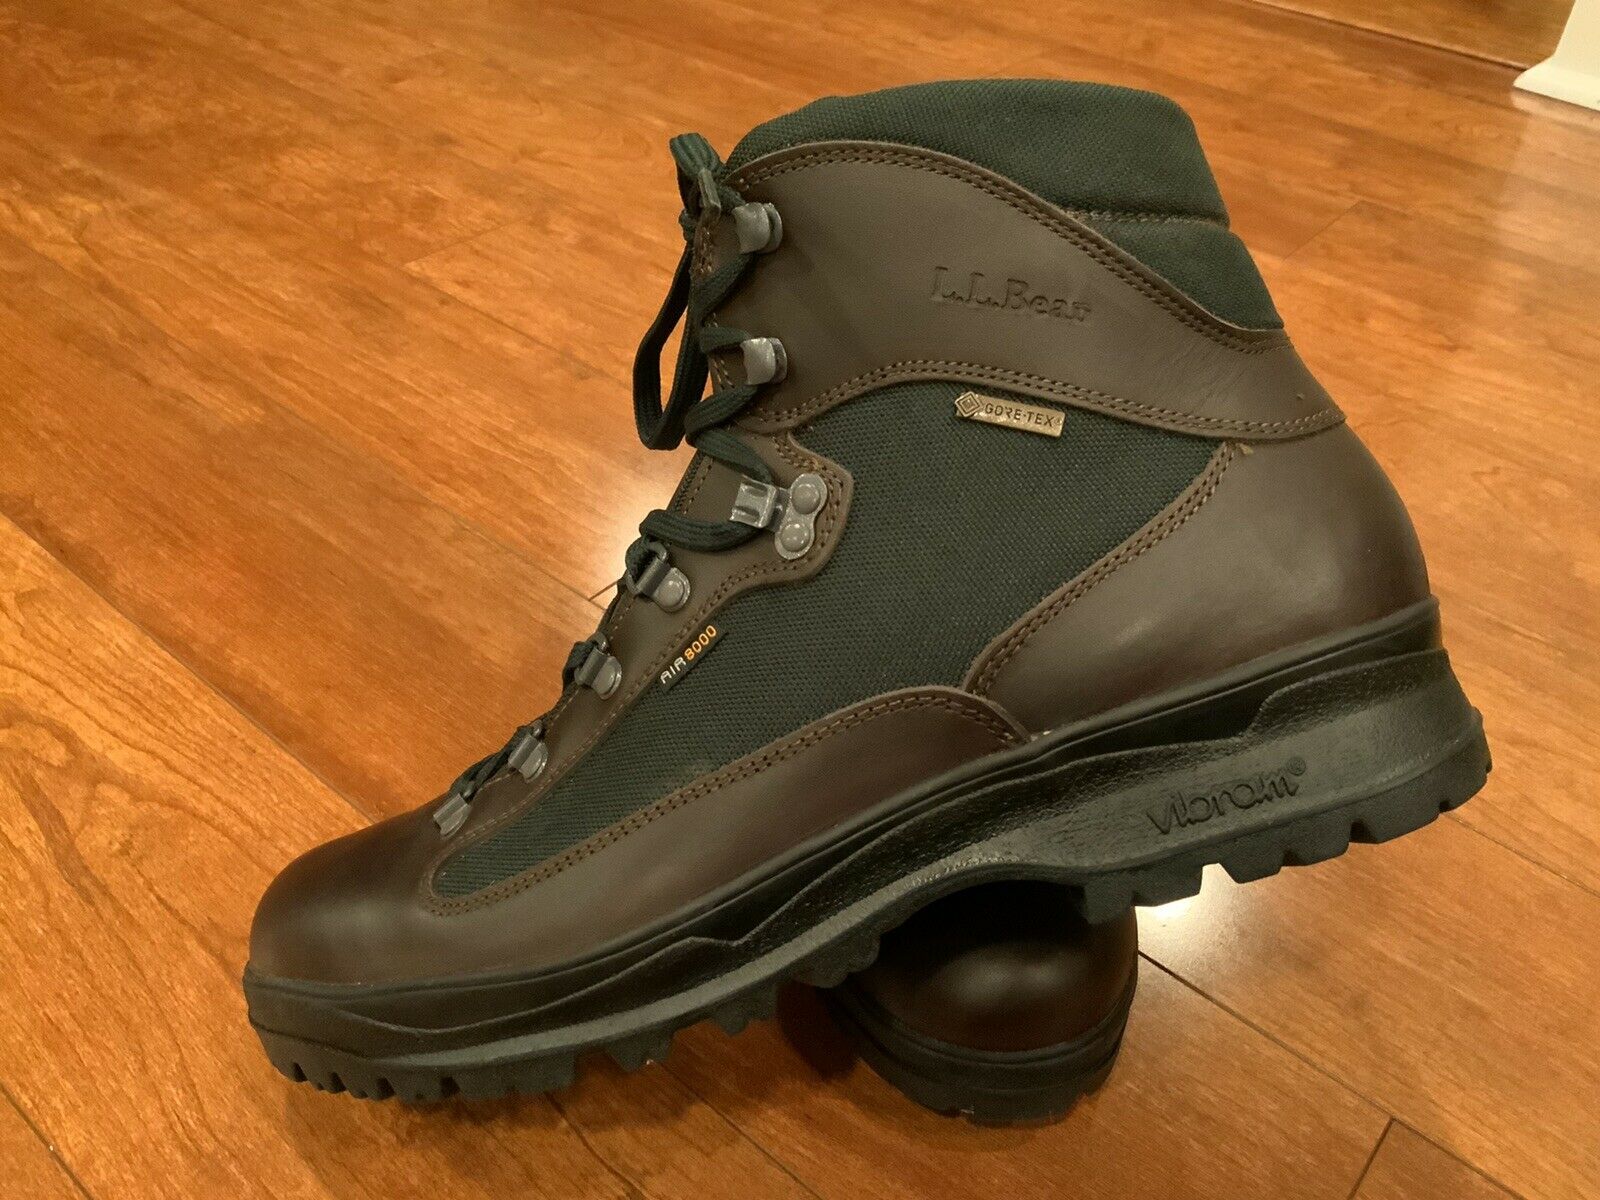 New! LL Bean Gore-Tex Cresta Hiking Boots - Leather/Fabric - Men’s 10.5 M - $259